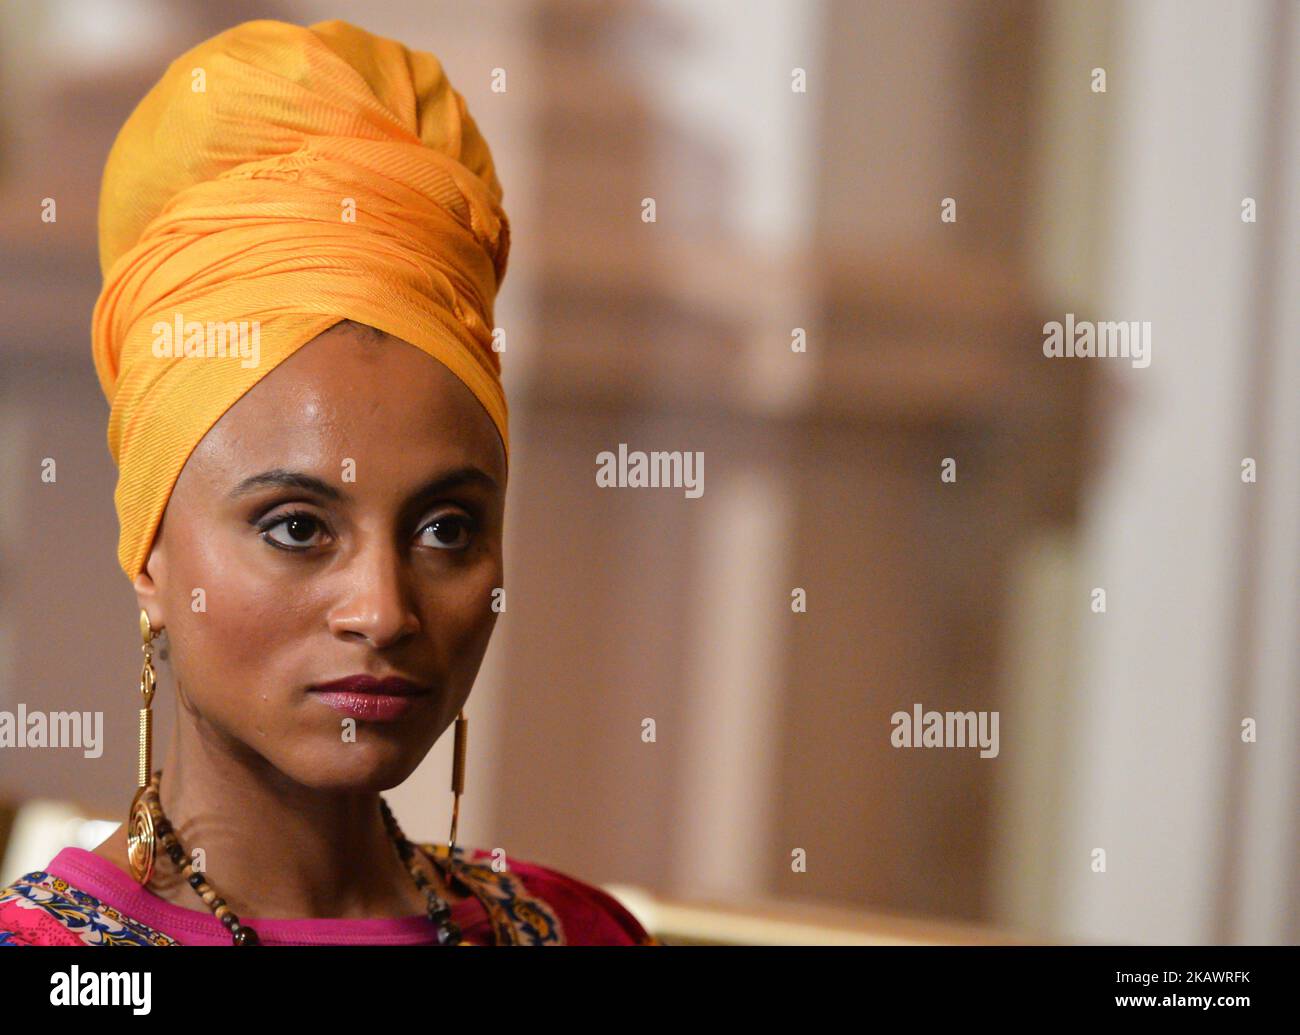 Sallay Matu Garnett during an on set photo call, which has just commenced in Dublin for the Pembridge Pictures and Umedia production of ‘A Girl from Mogadishu’ – a true story based on the testimony of Ifrah Ahmed. Born into a refugee camp in war-torn Somalia, Ifrah was trafficked to Ireland as a teenager. Recounting her traumatic childhood experiences of Female Genital Mutilation / Cutting (FGM/C) when applying for refugee status, she was again traumatized and decided to devote her life to the eradication of the practice. Ifrah emerged as one of the world’s foremost international activists ag Stock Photo